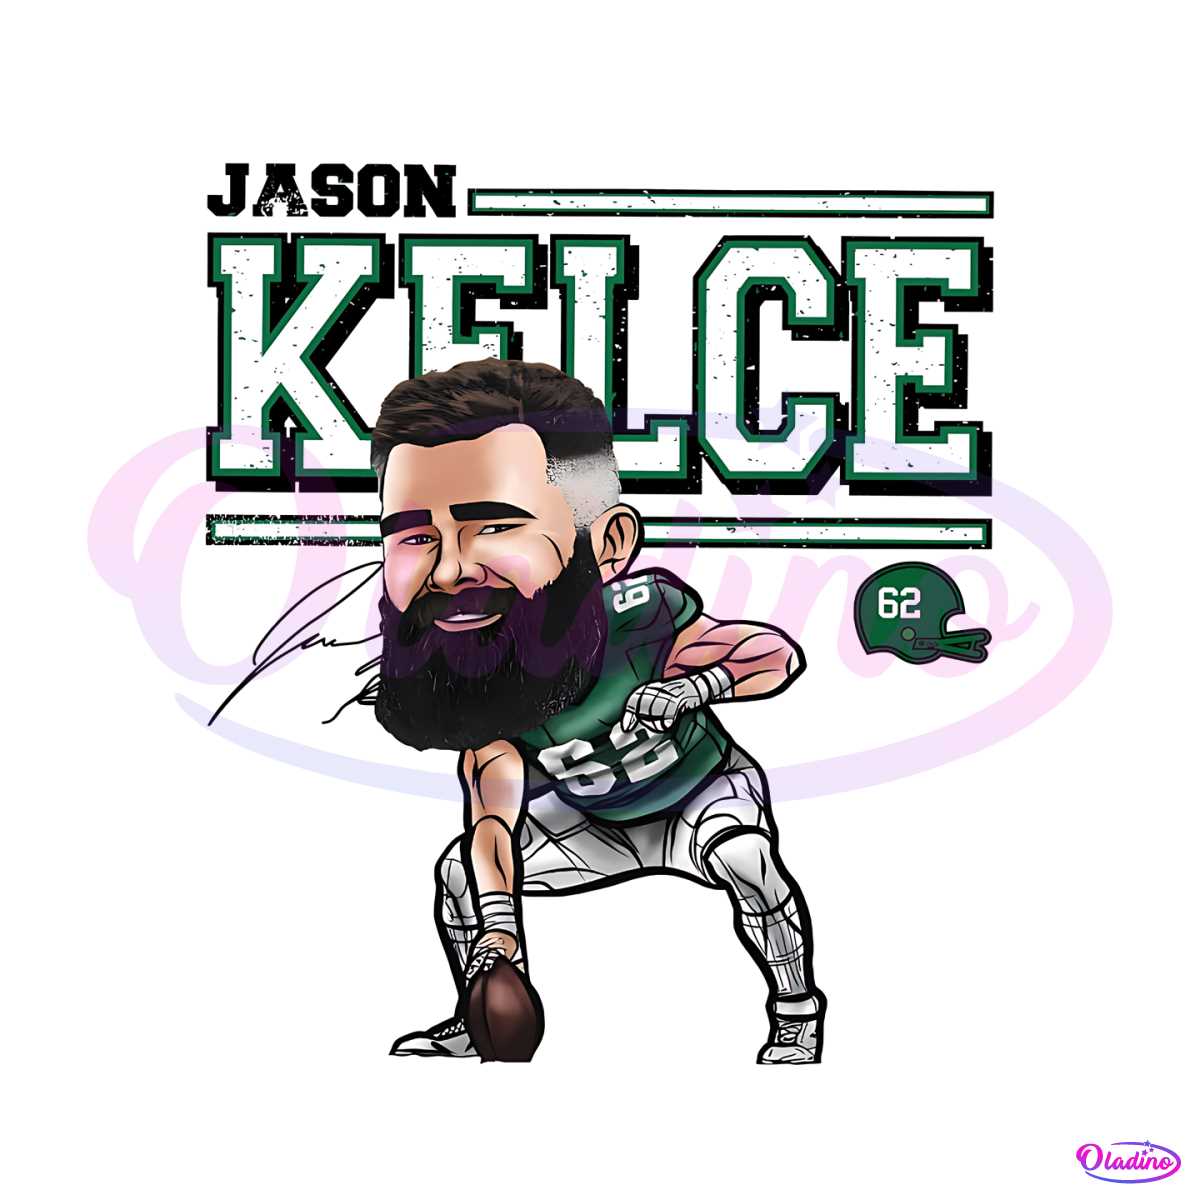 jason-kelce-62-eagles-football-player-png